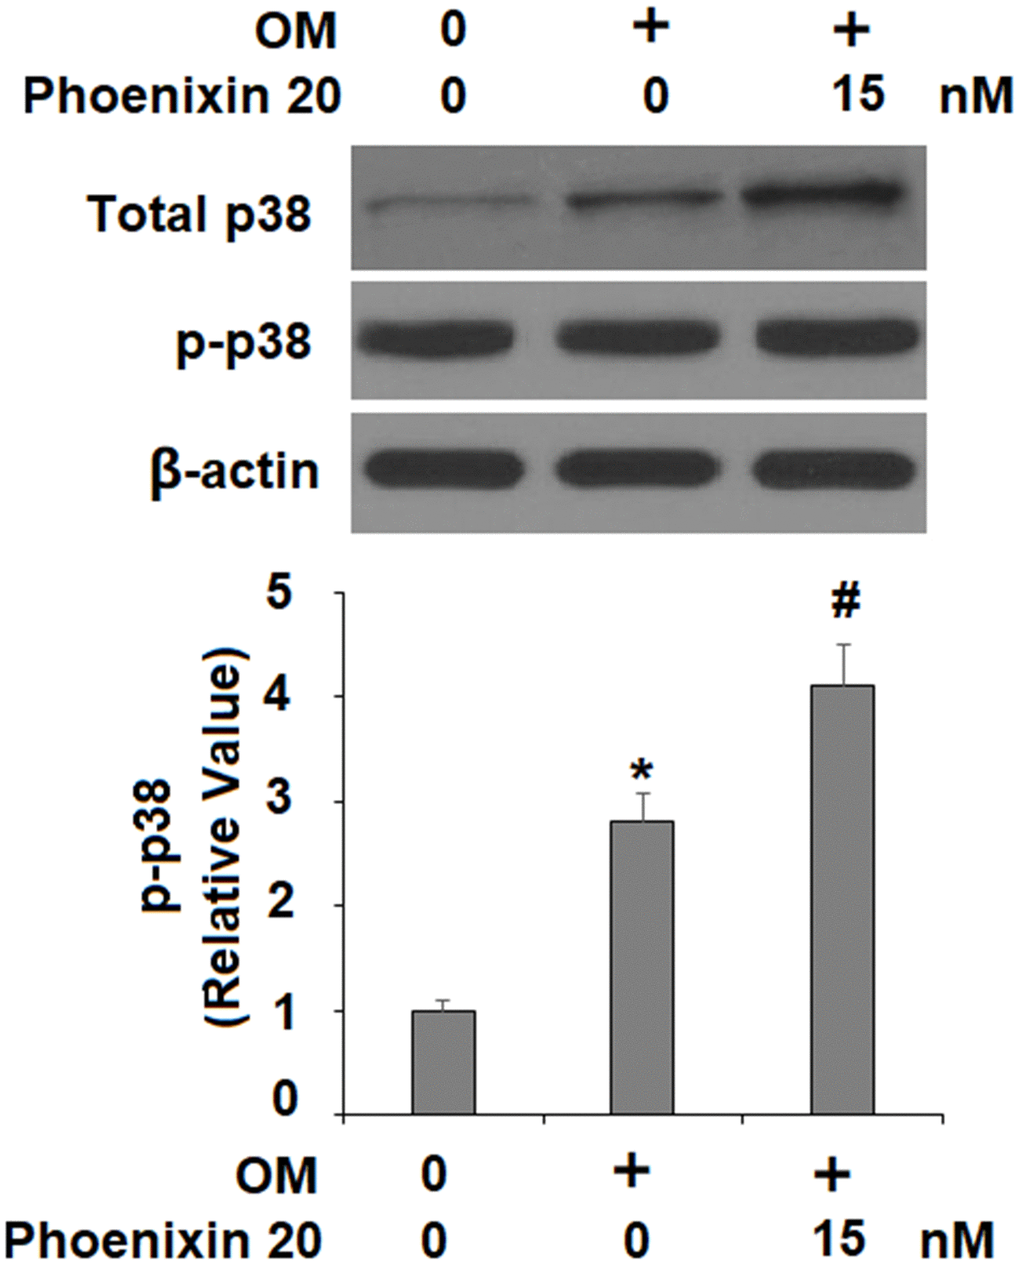 Phoenixin 20 activates p38. Cells were stimulated with osteogenic medium with or without phoenixin 20 (15 nM) for 2 h. Phosphorylated and total p38 were detected (*, #, P